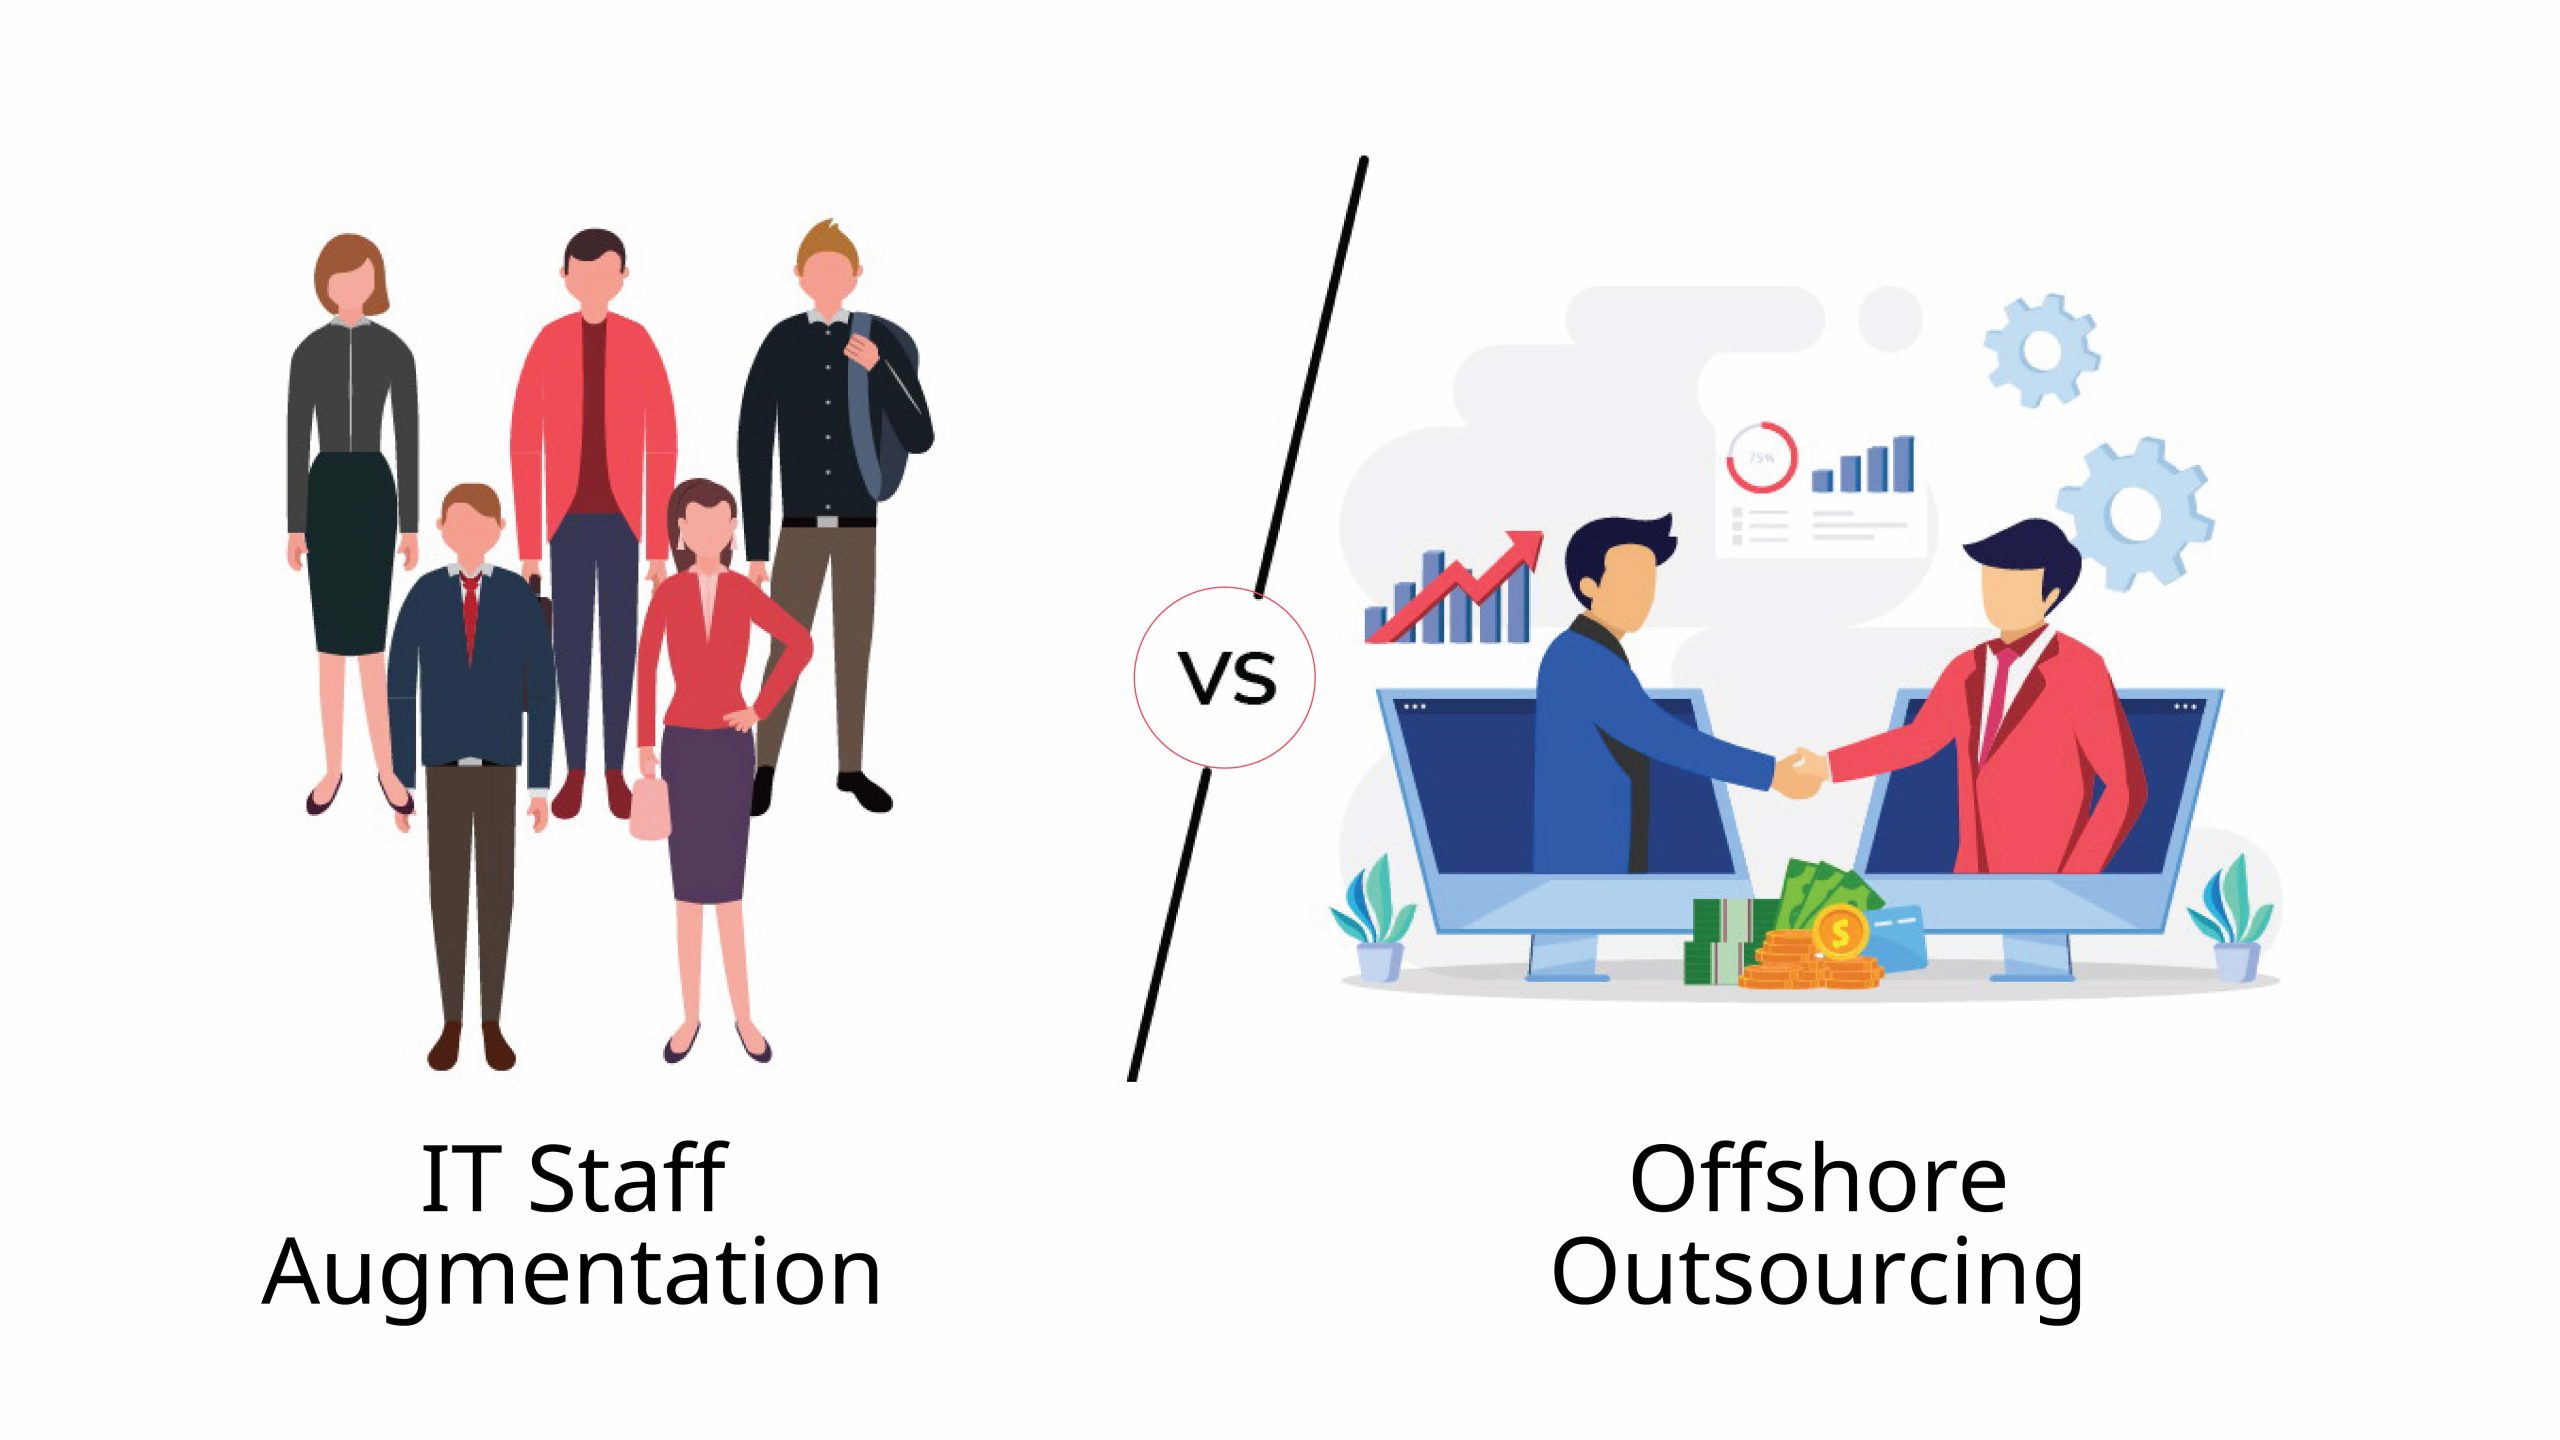 IT staff augmentation and Offshore outsourcing